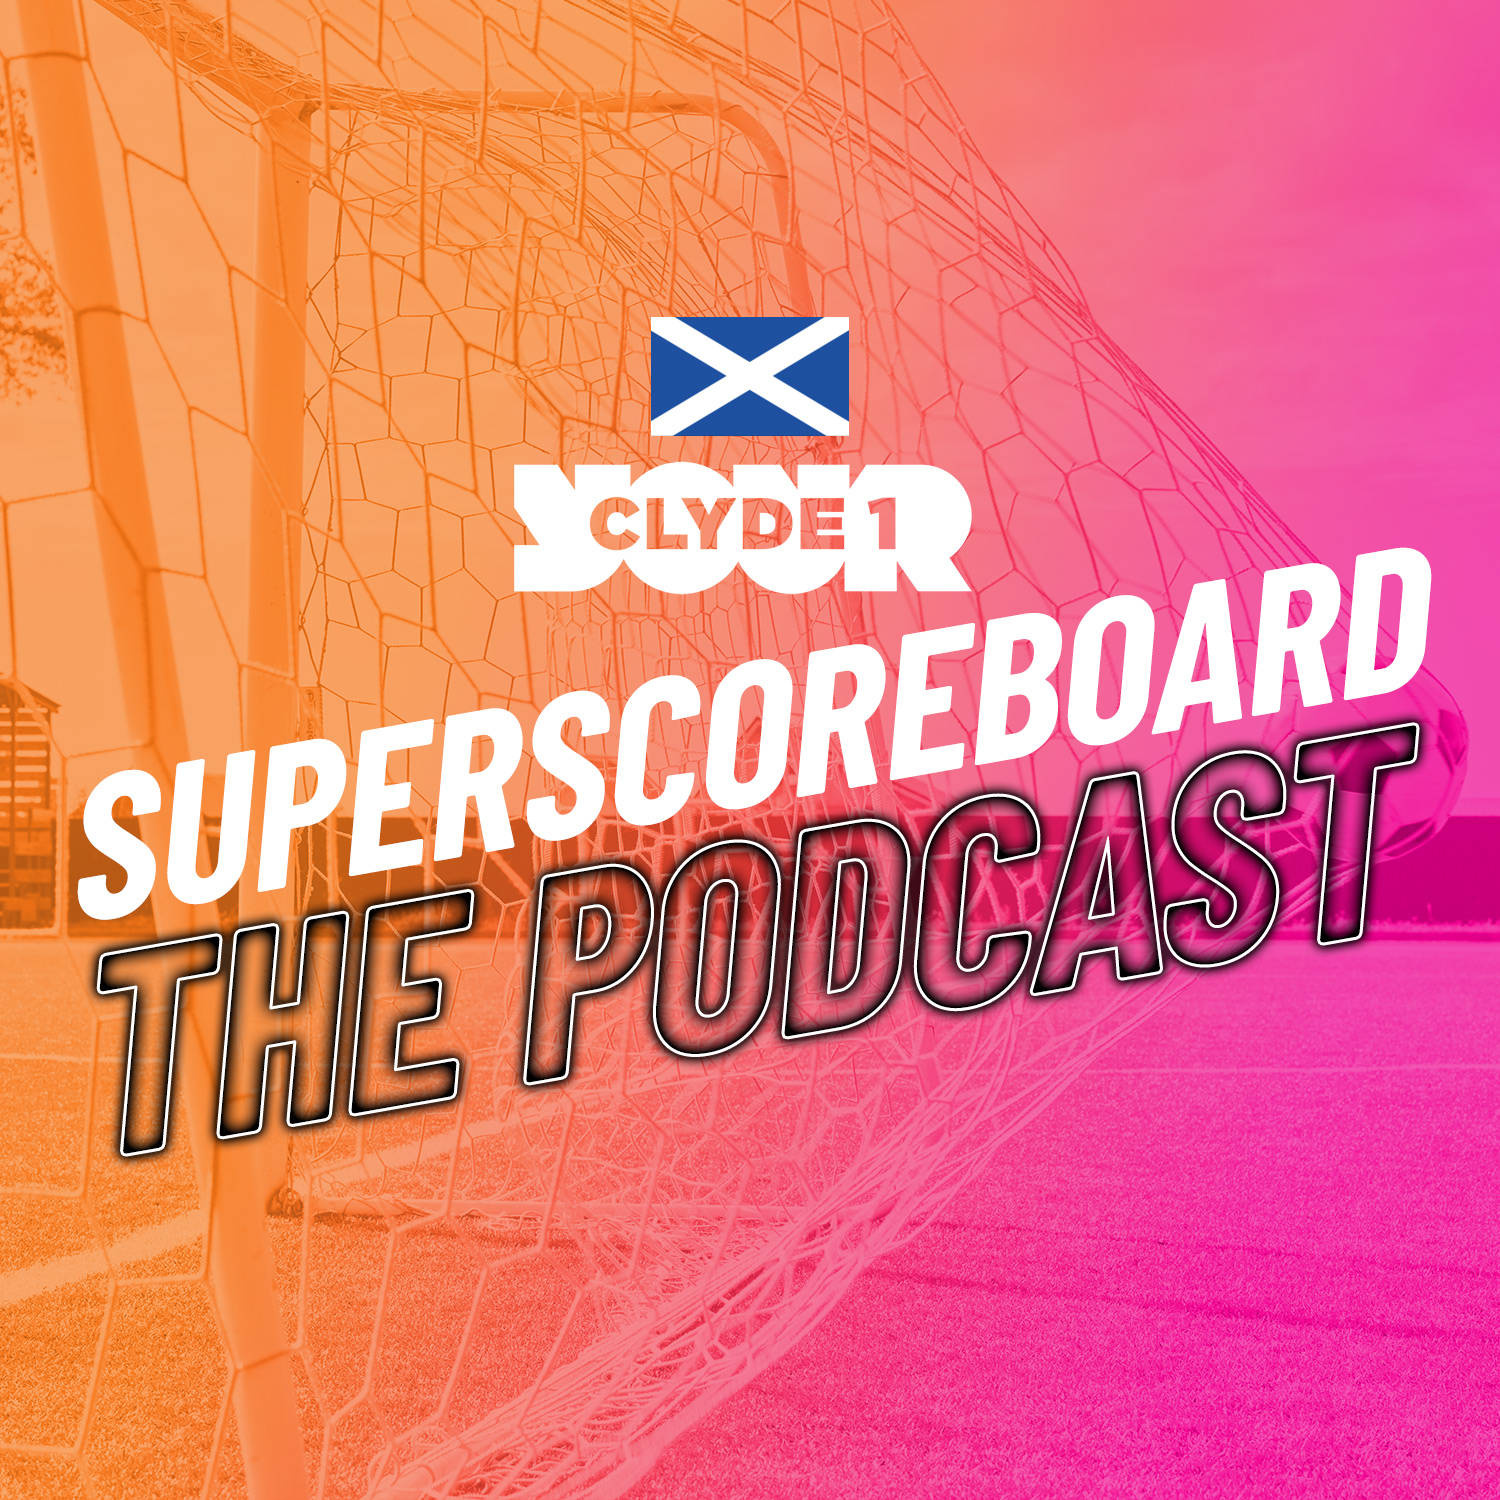 Friday 31st May Clyde 1 Superscoreboard